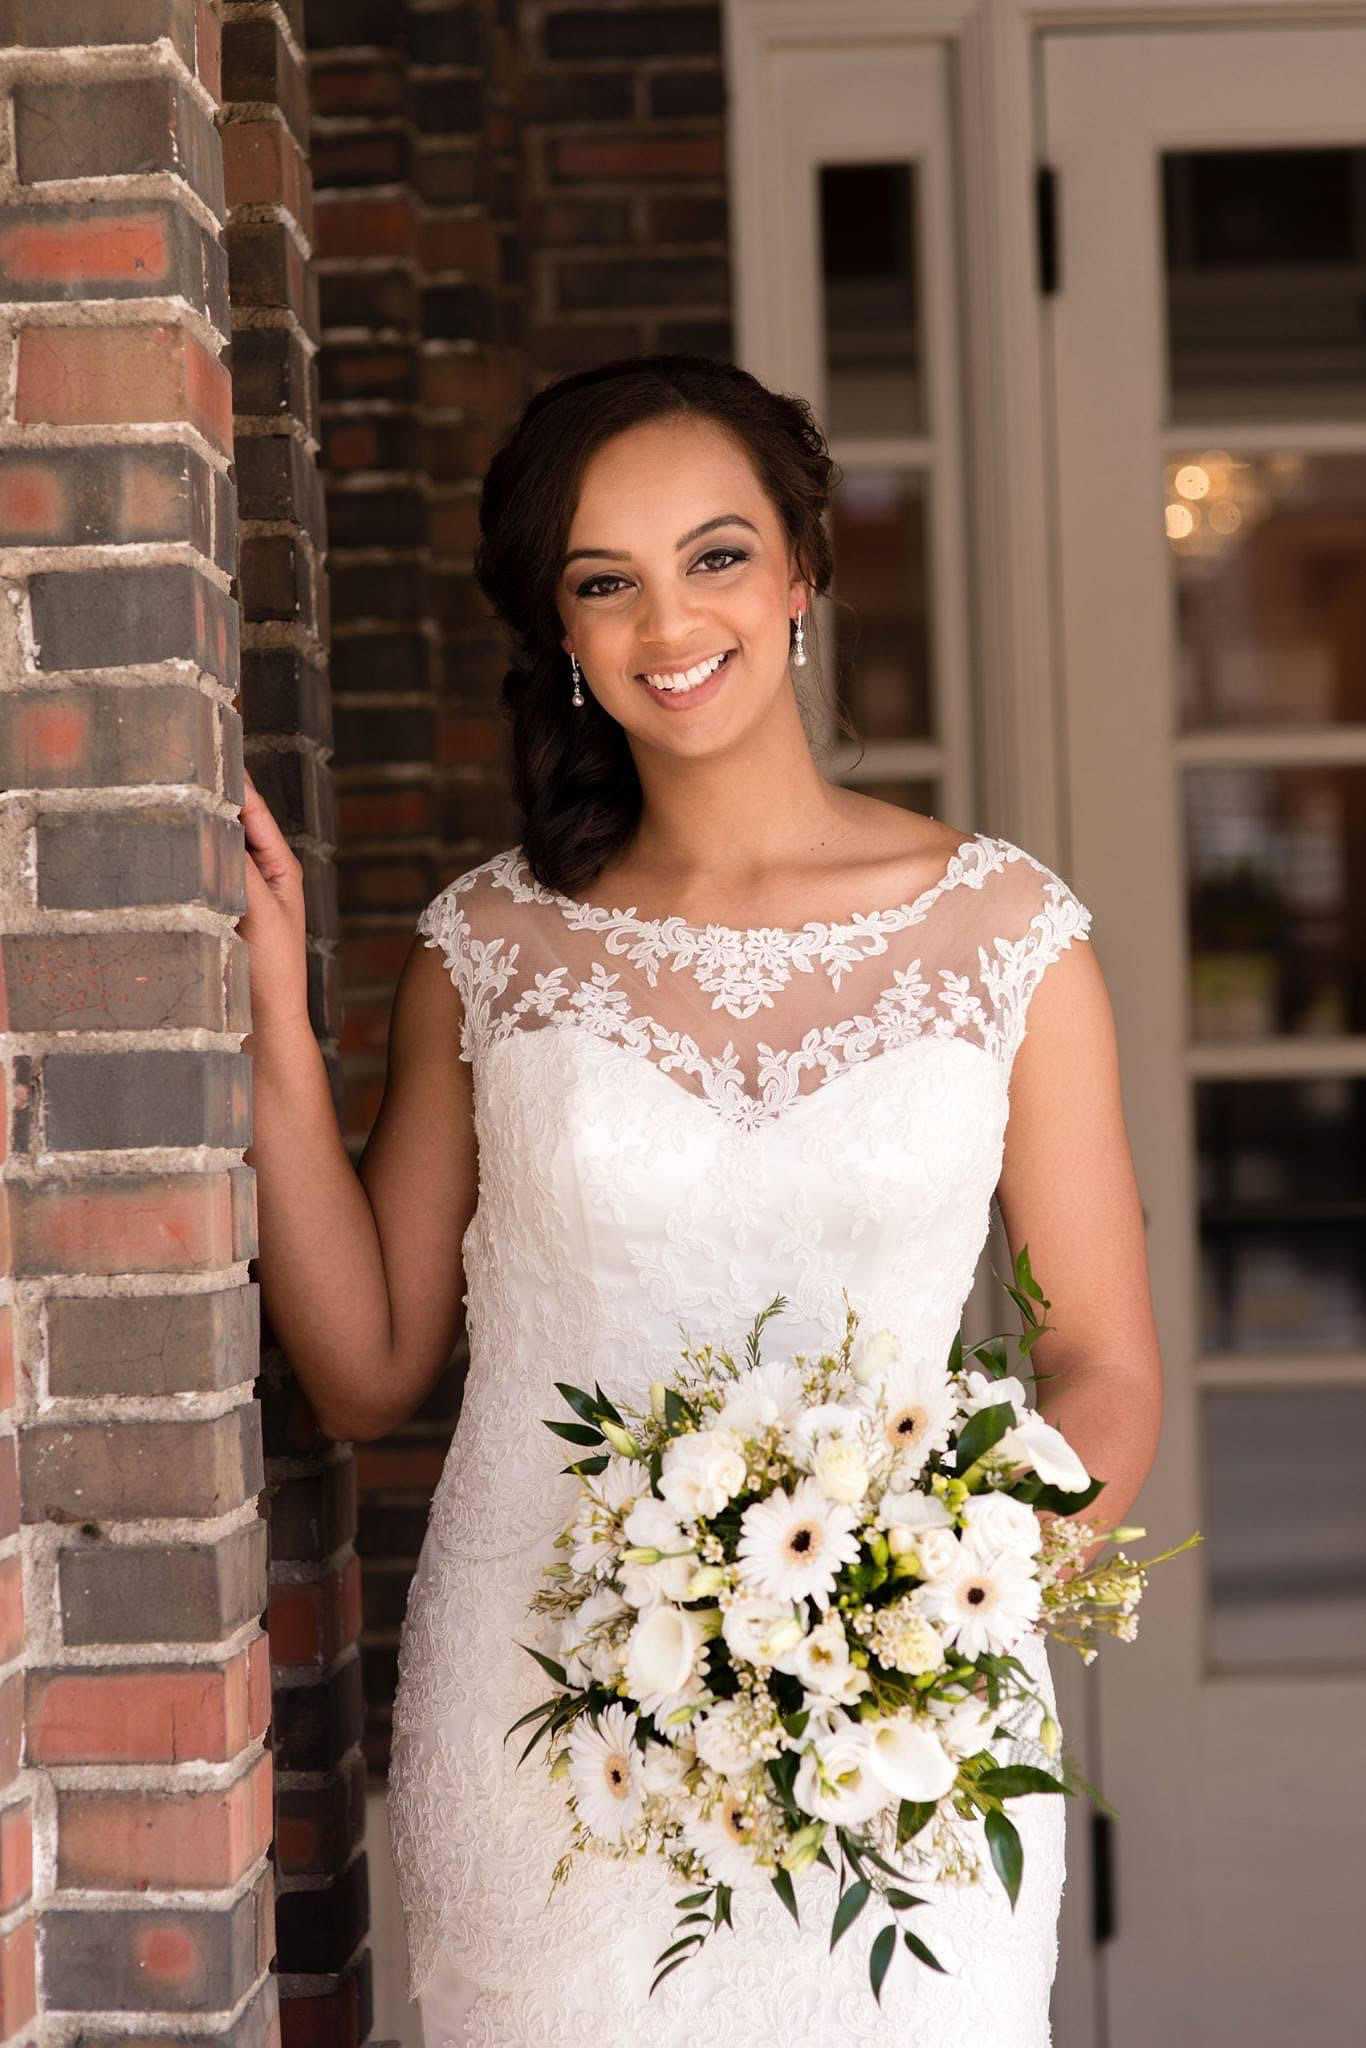 Bride in lace wedding gown holding white and green bouquet, smiling against brick doorway backdrop.